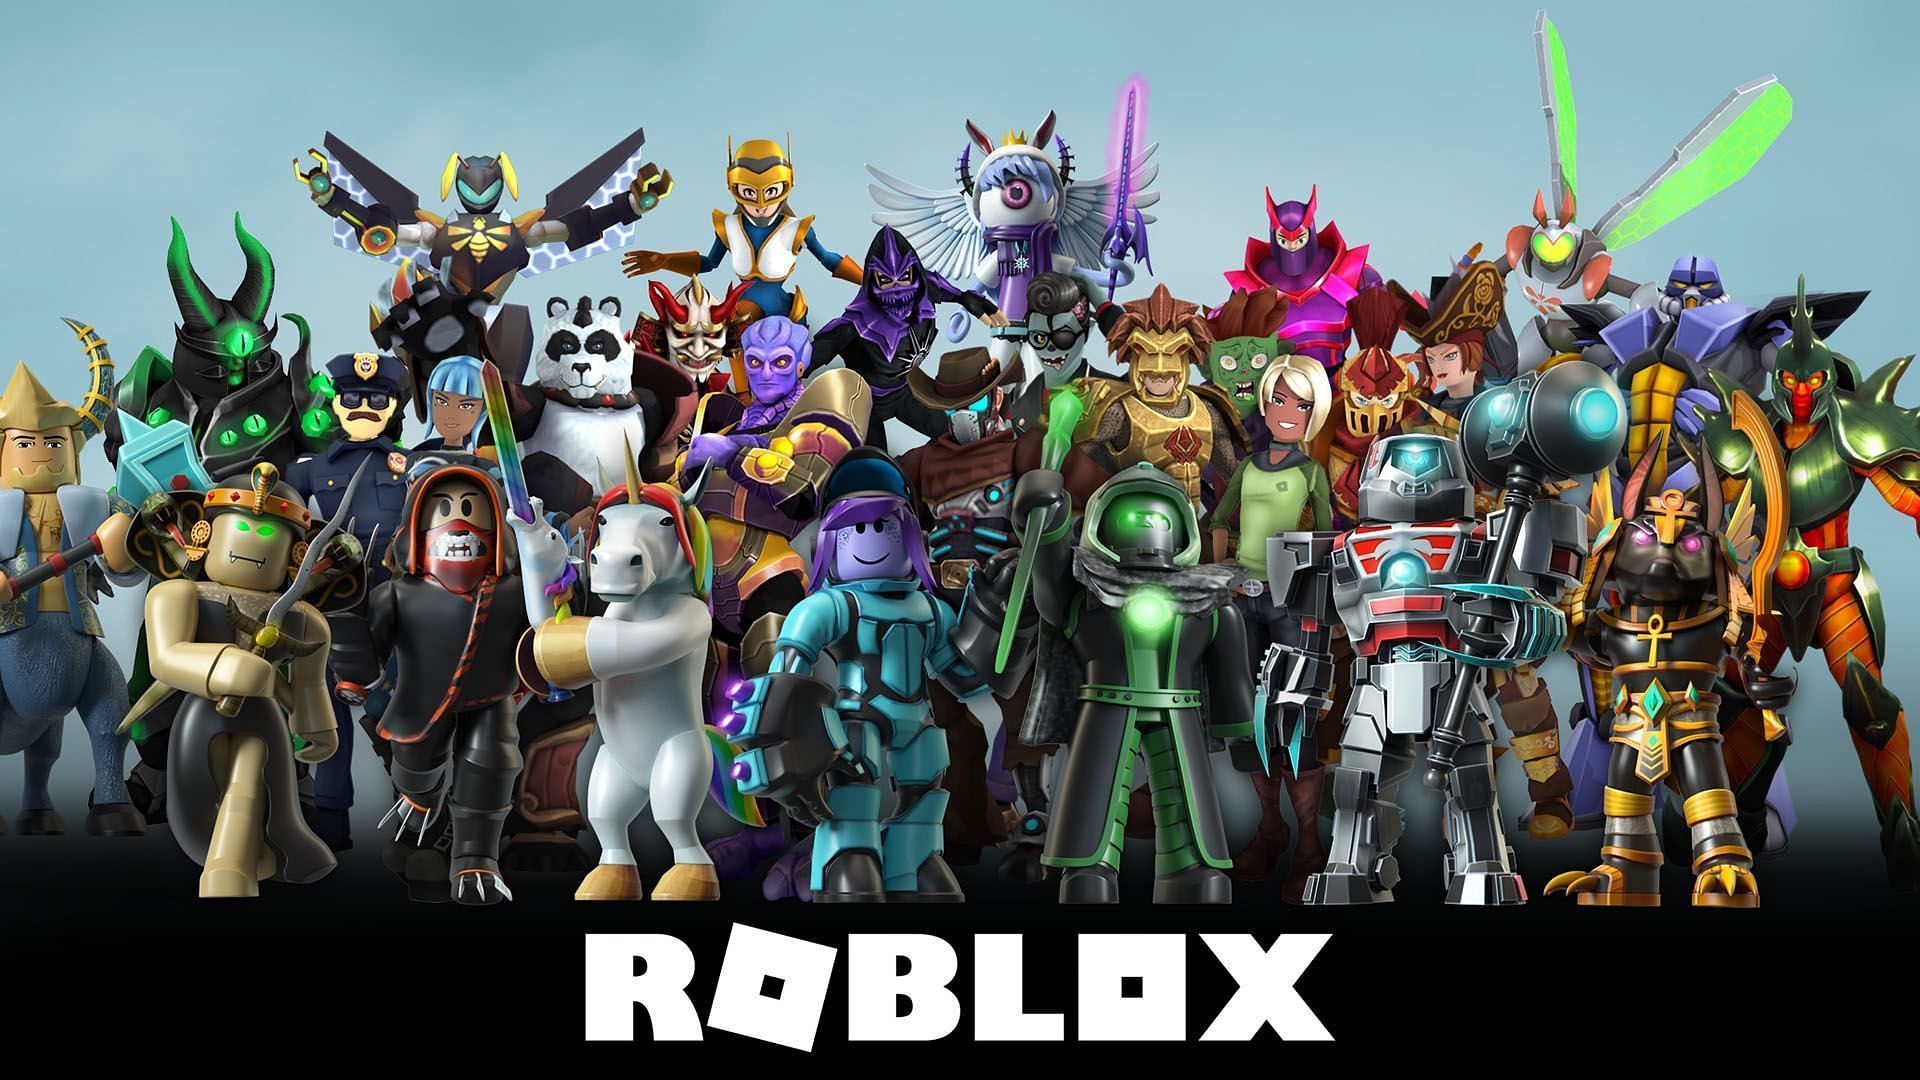 Get free items with these codes (Image via Roblox)